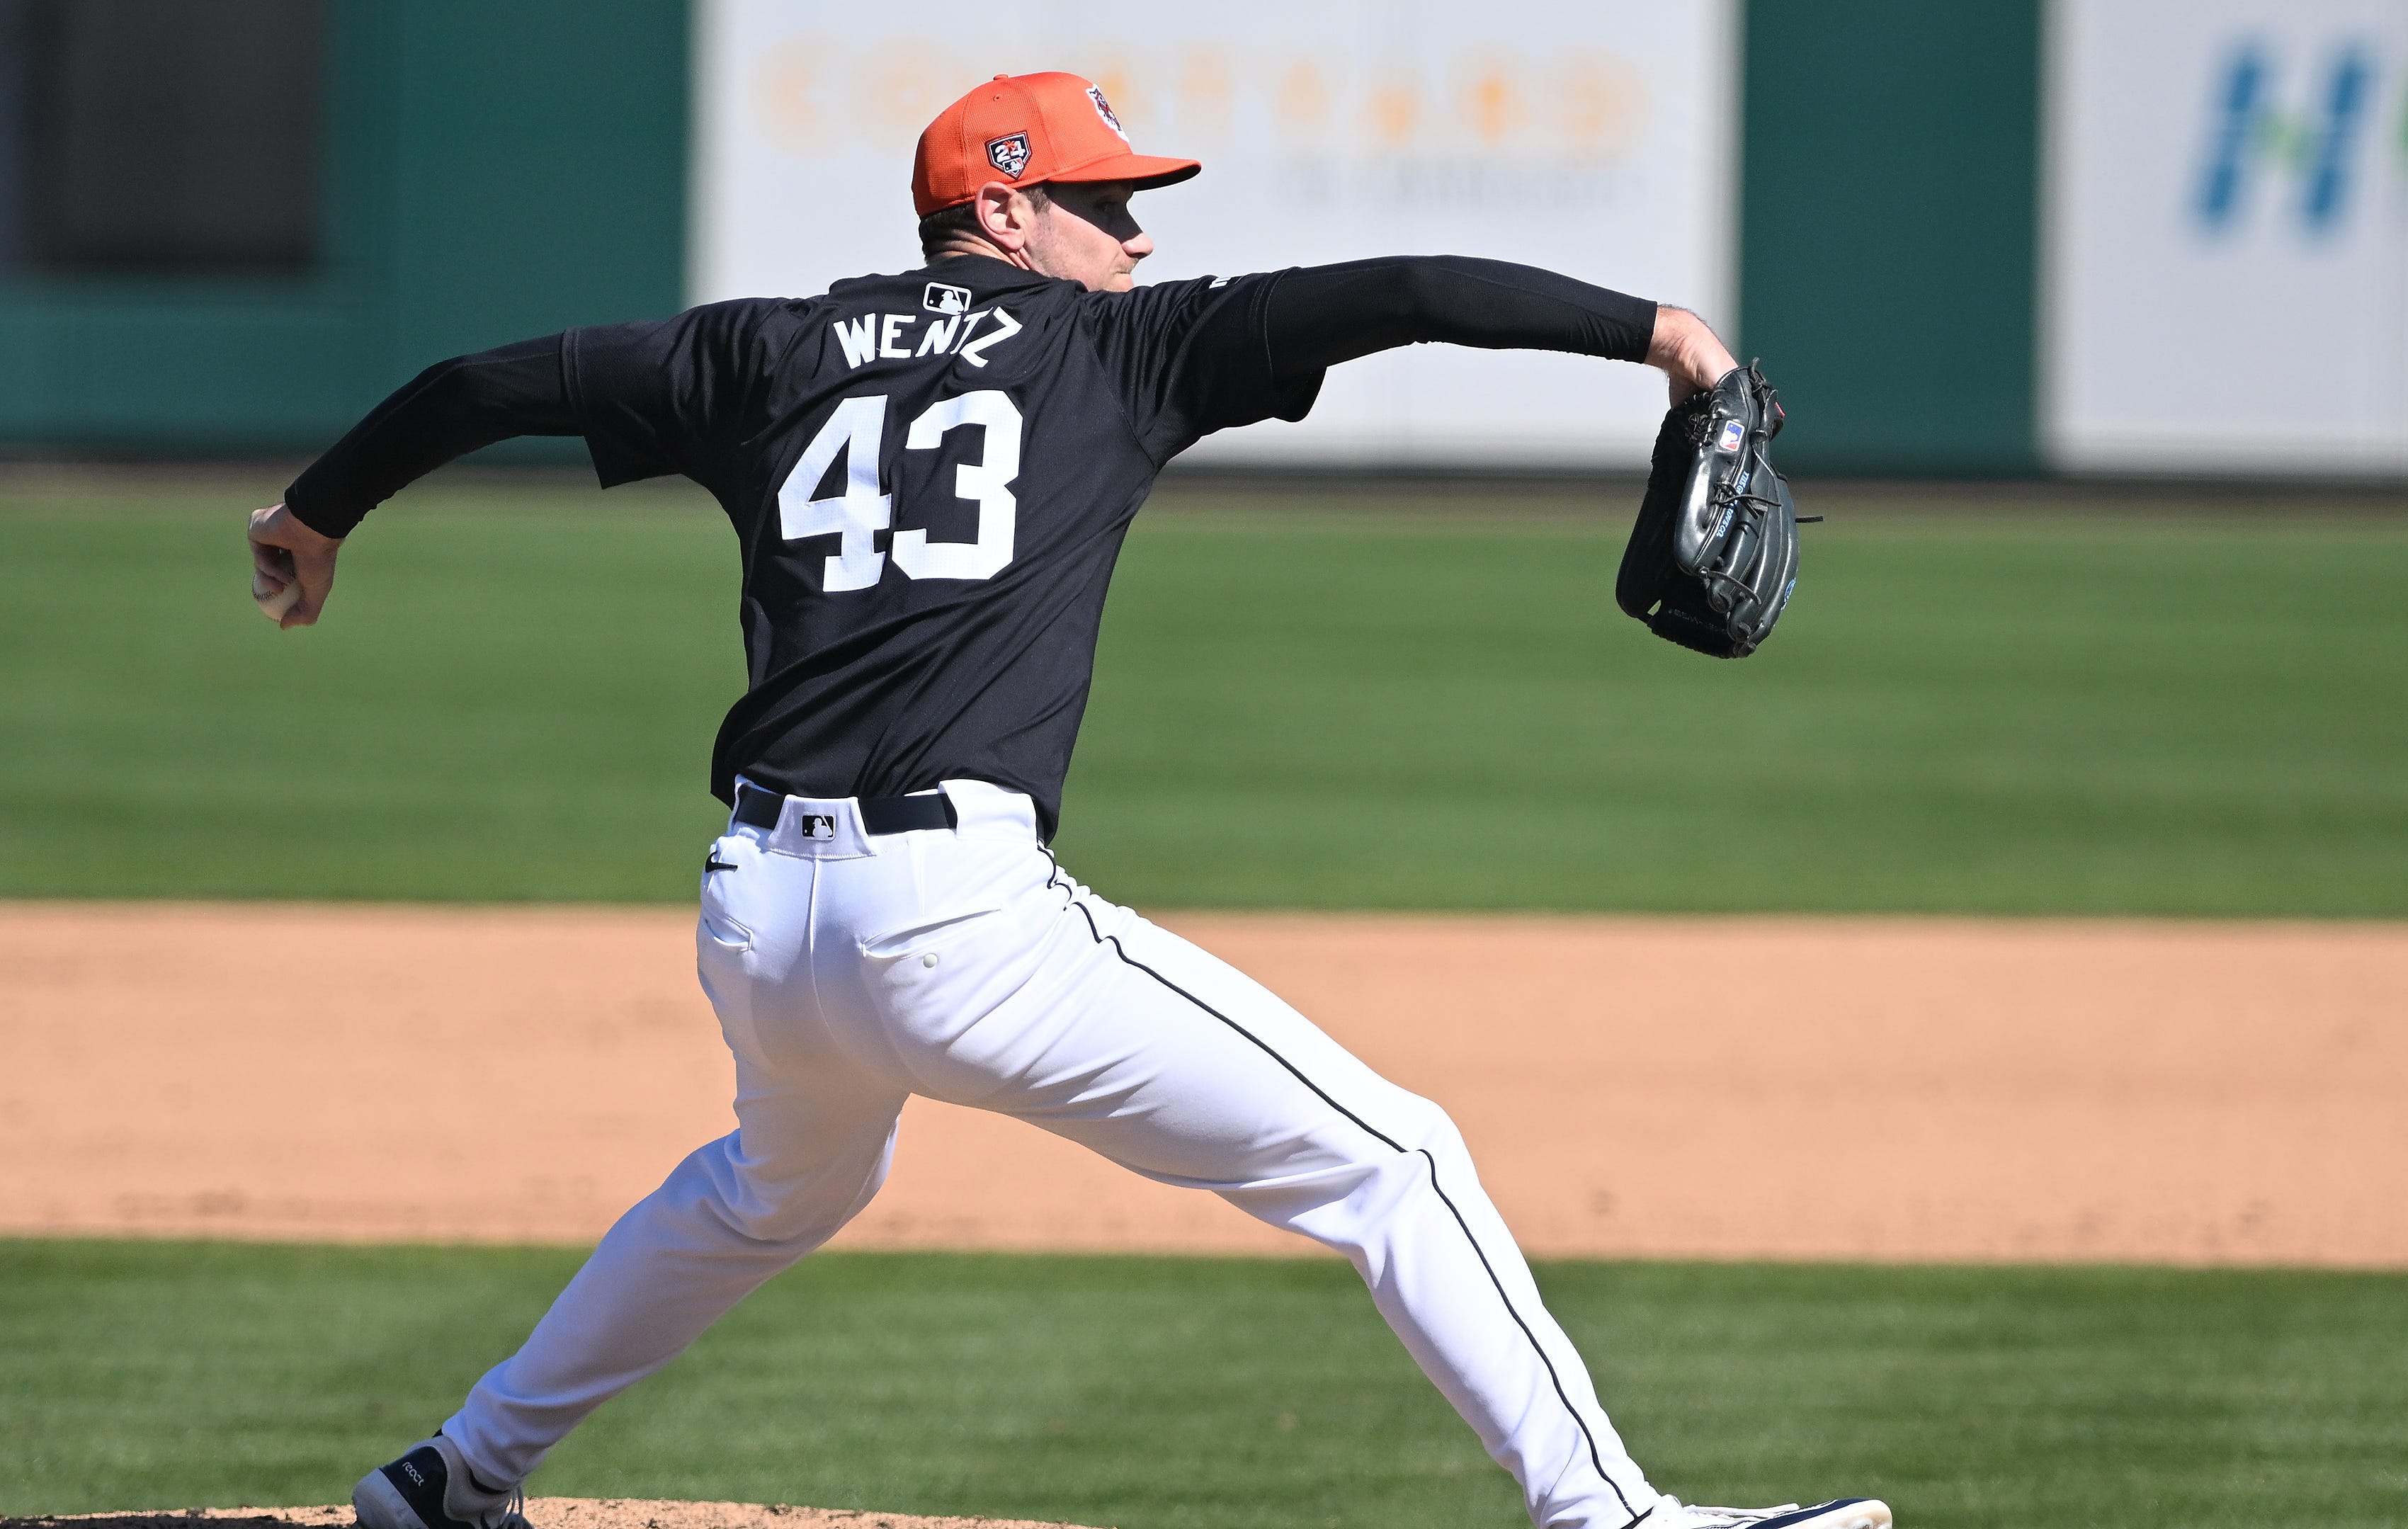 No. 43 Joey Wentz – LHP, 6-5, 220, Age in season: 26

Moving to the bullpen has helped bring out the best version of Wentz more often. The work he did to change the metrics on his four-seamer to create more ride at the top of the zone and more vertical separation between his secondary pitches was massive, as well. He looked like a much more confident pitcher this spring. He posted a 1.04 WHIP and limited hitters to a .204 average with 19 strikeouts in 15 innings. The only blemish was four solo homers, which, in context of how well he pitched, seemed almost flukey. 

2024 salary: $770,000